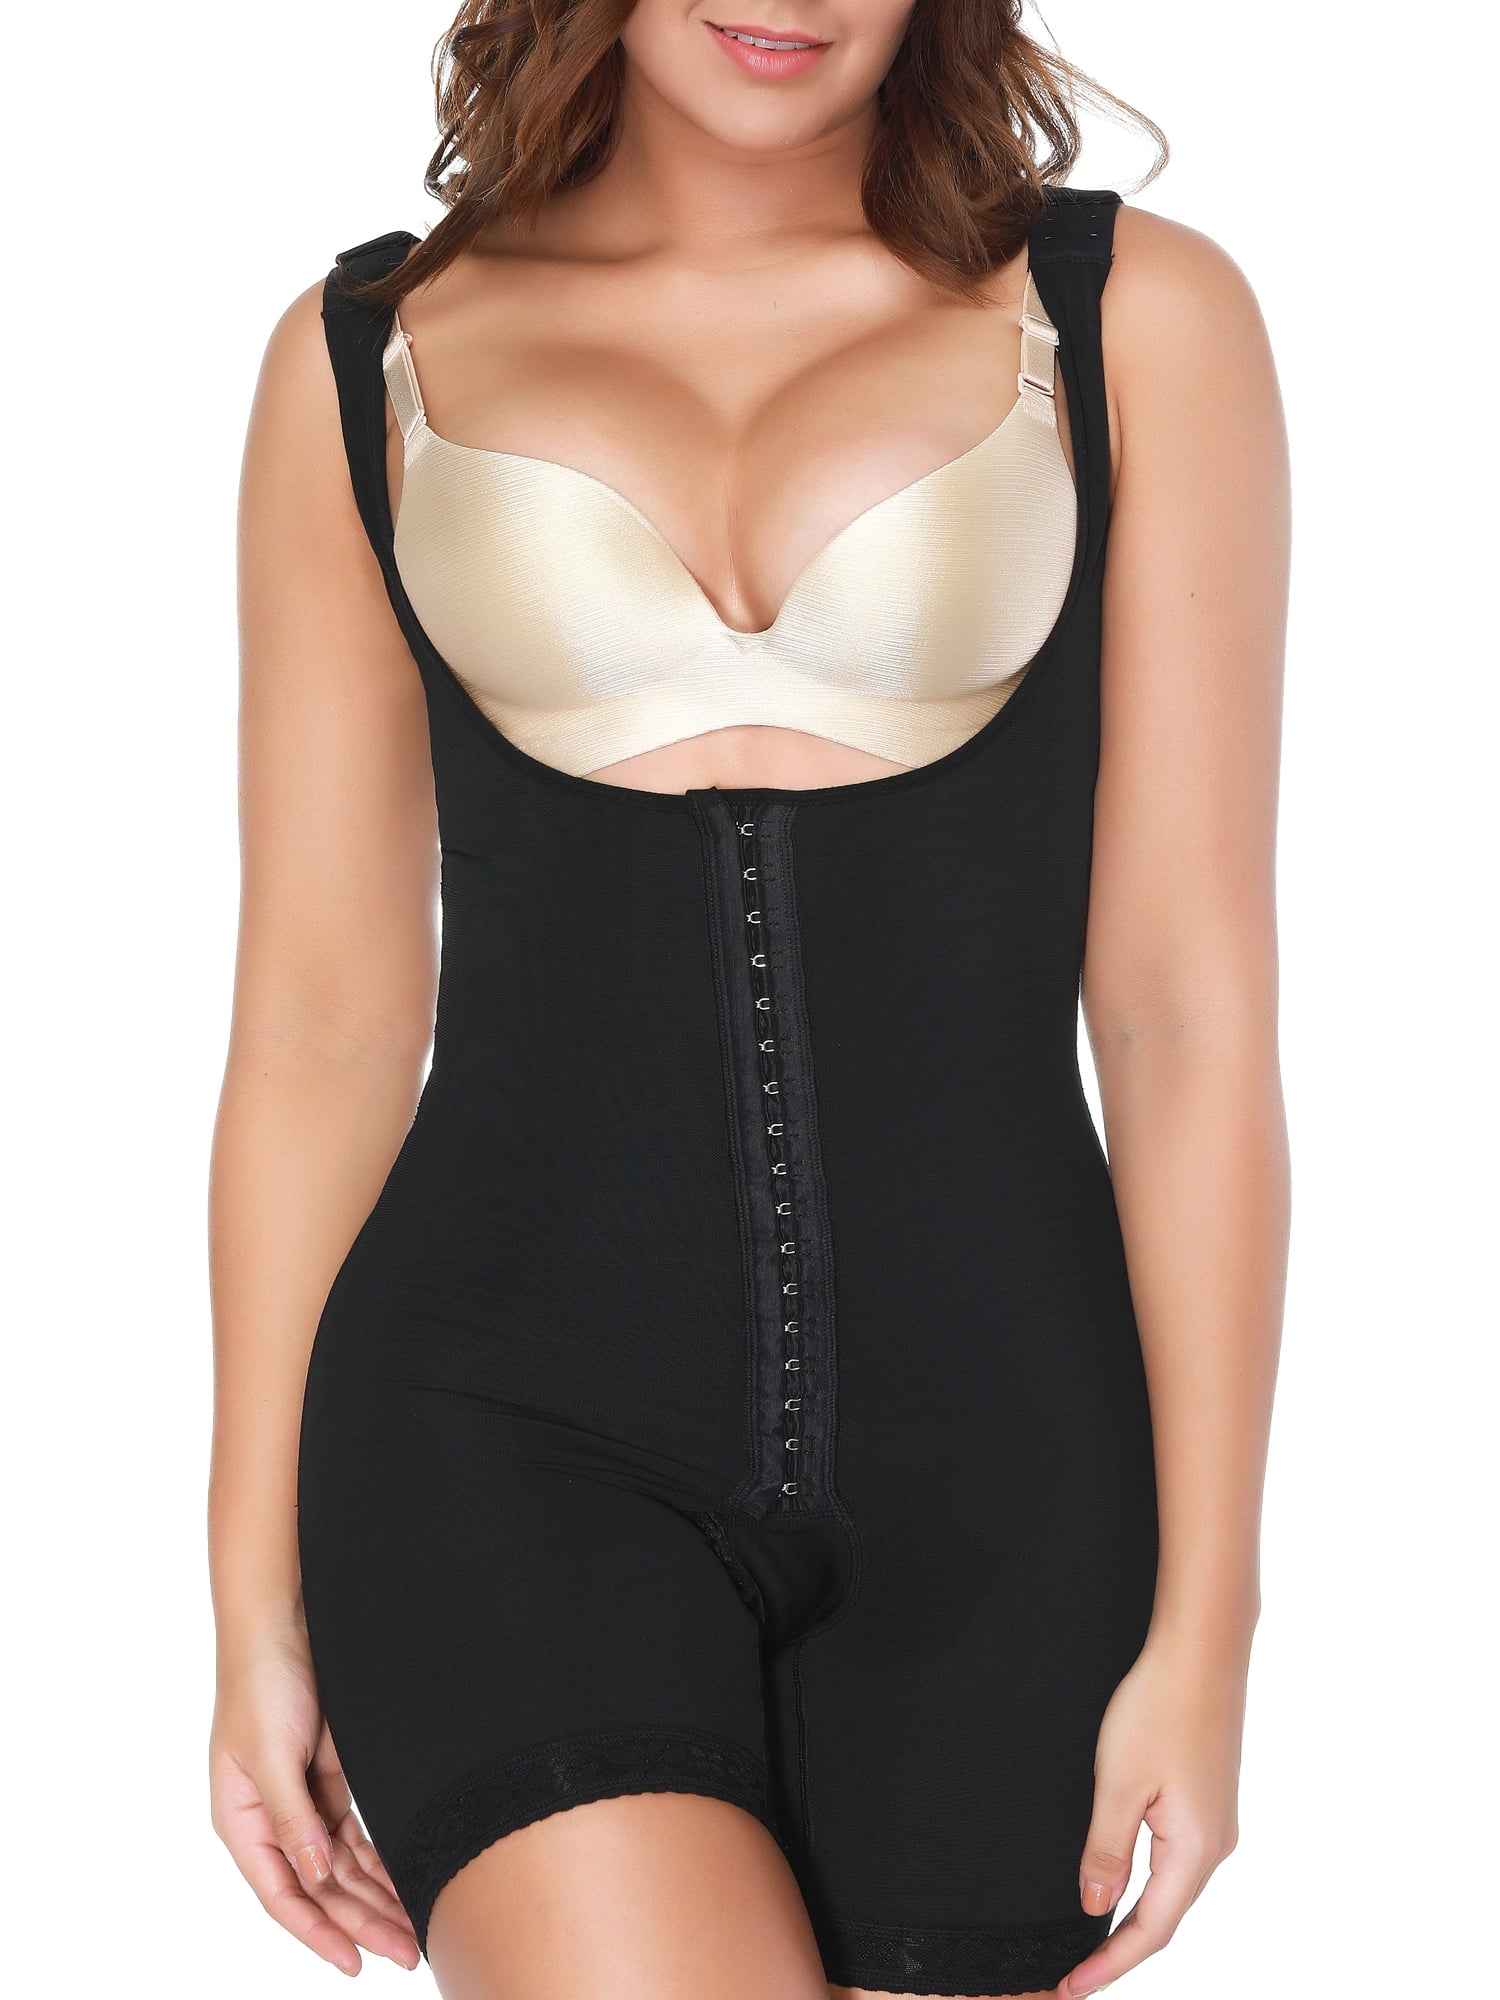 Fajas Colombianas Reductoras Butt-Lifter Shapewear Compression